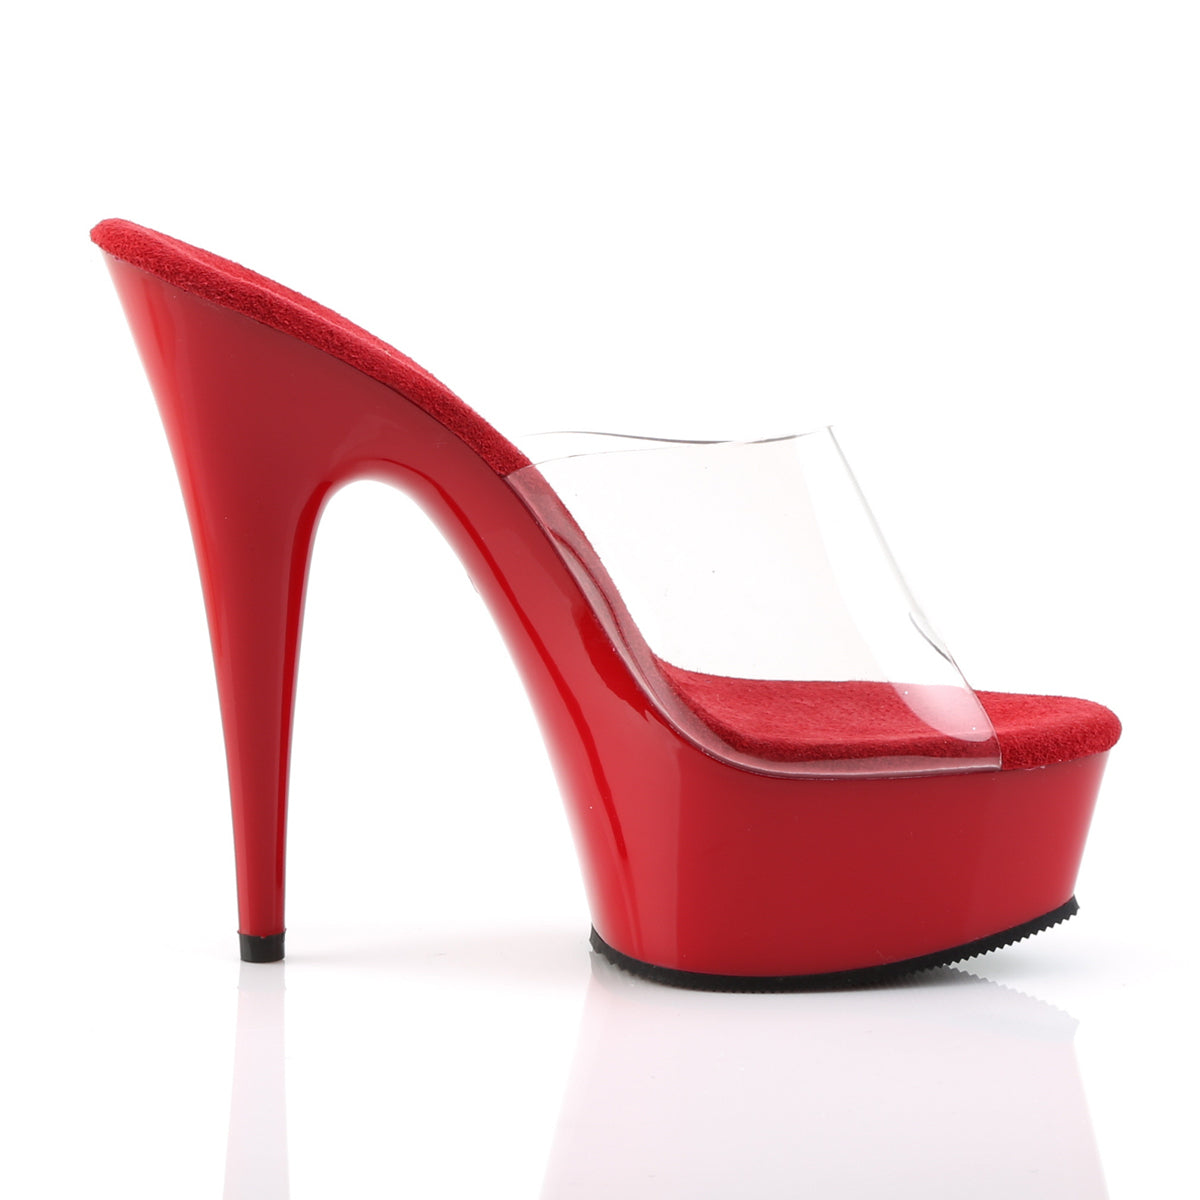 DELIGHT-601 6 Inch Heel Clear and Red Pole Dancing Platforms-Pleaser- Sexy Shoes Fetish Heels